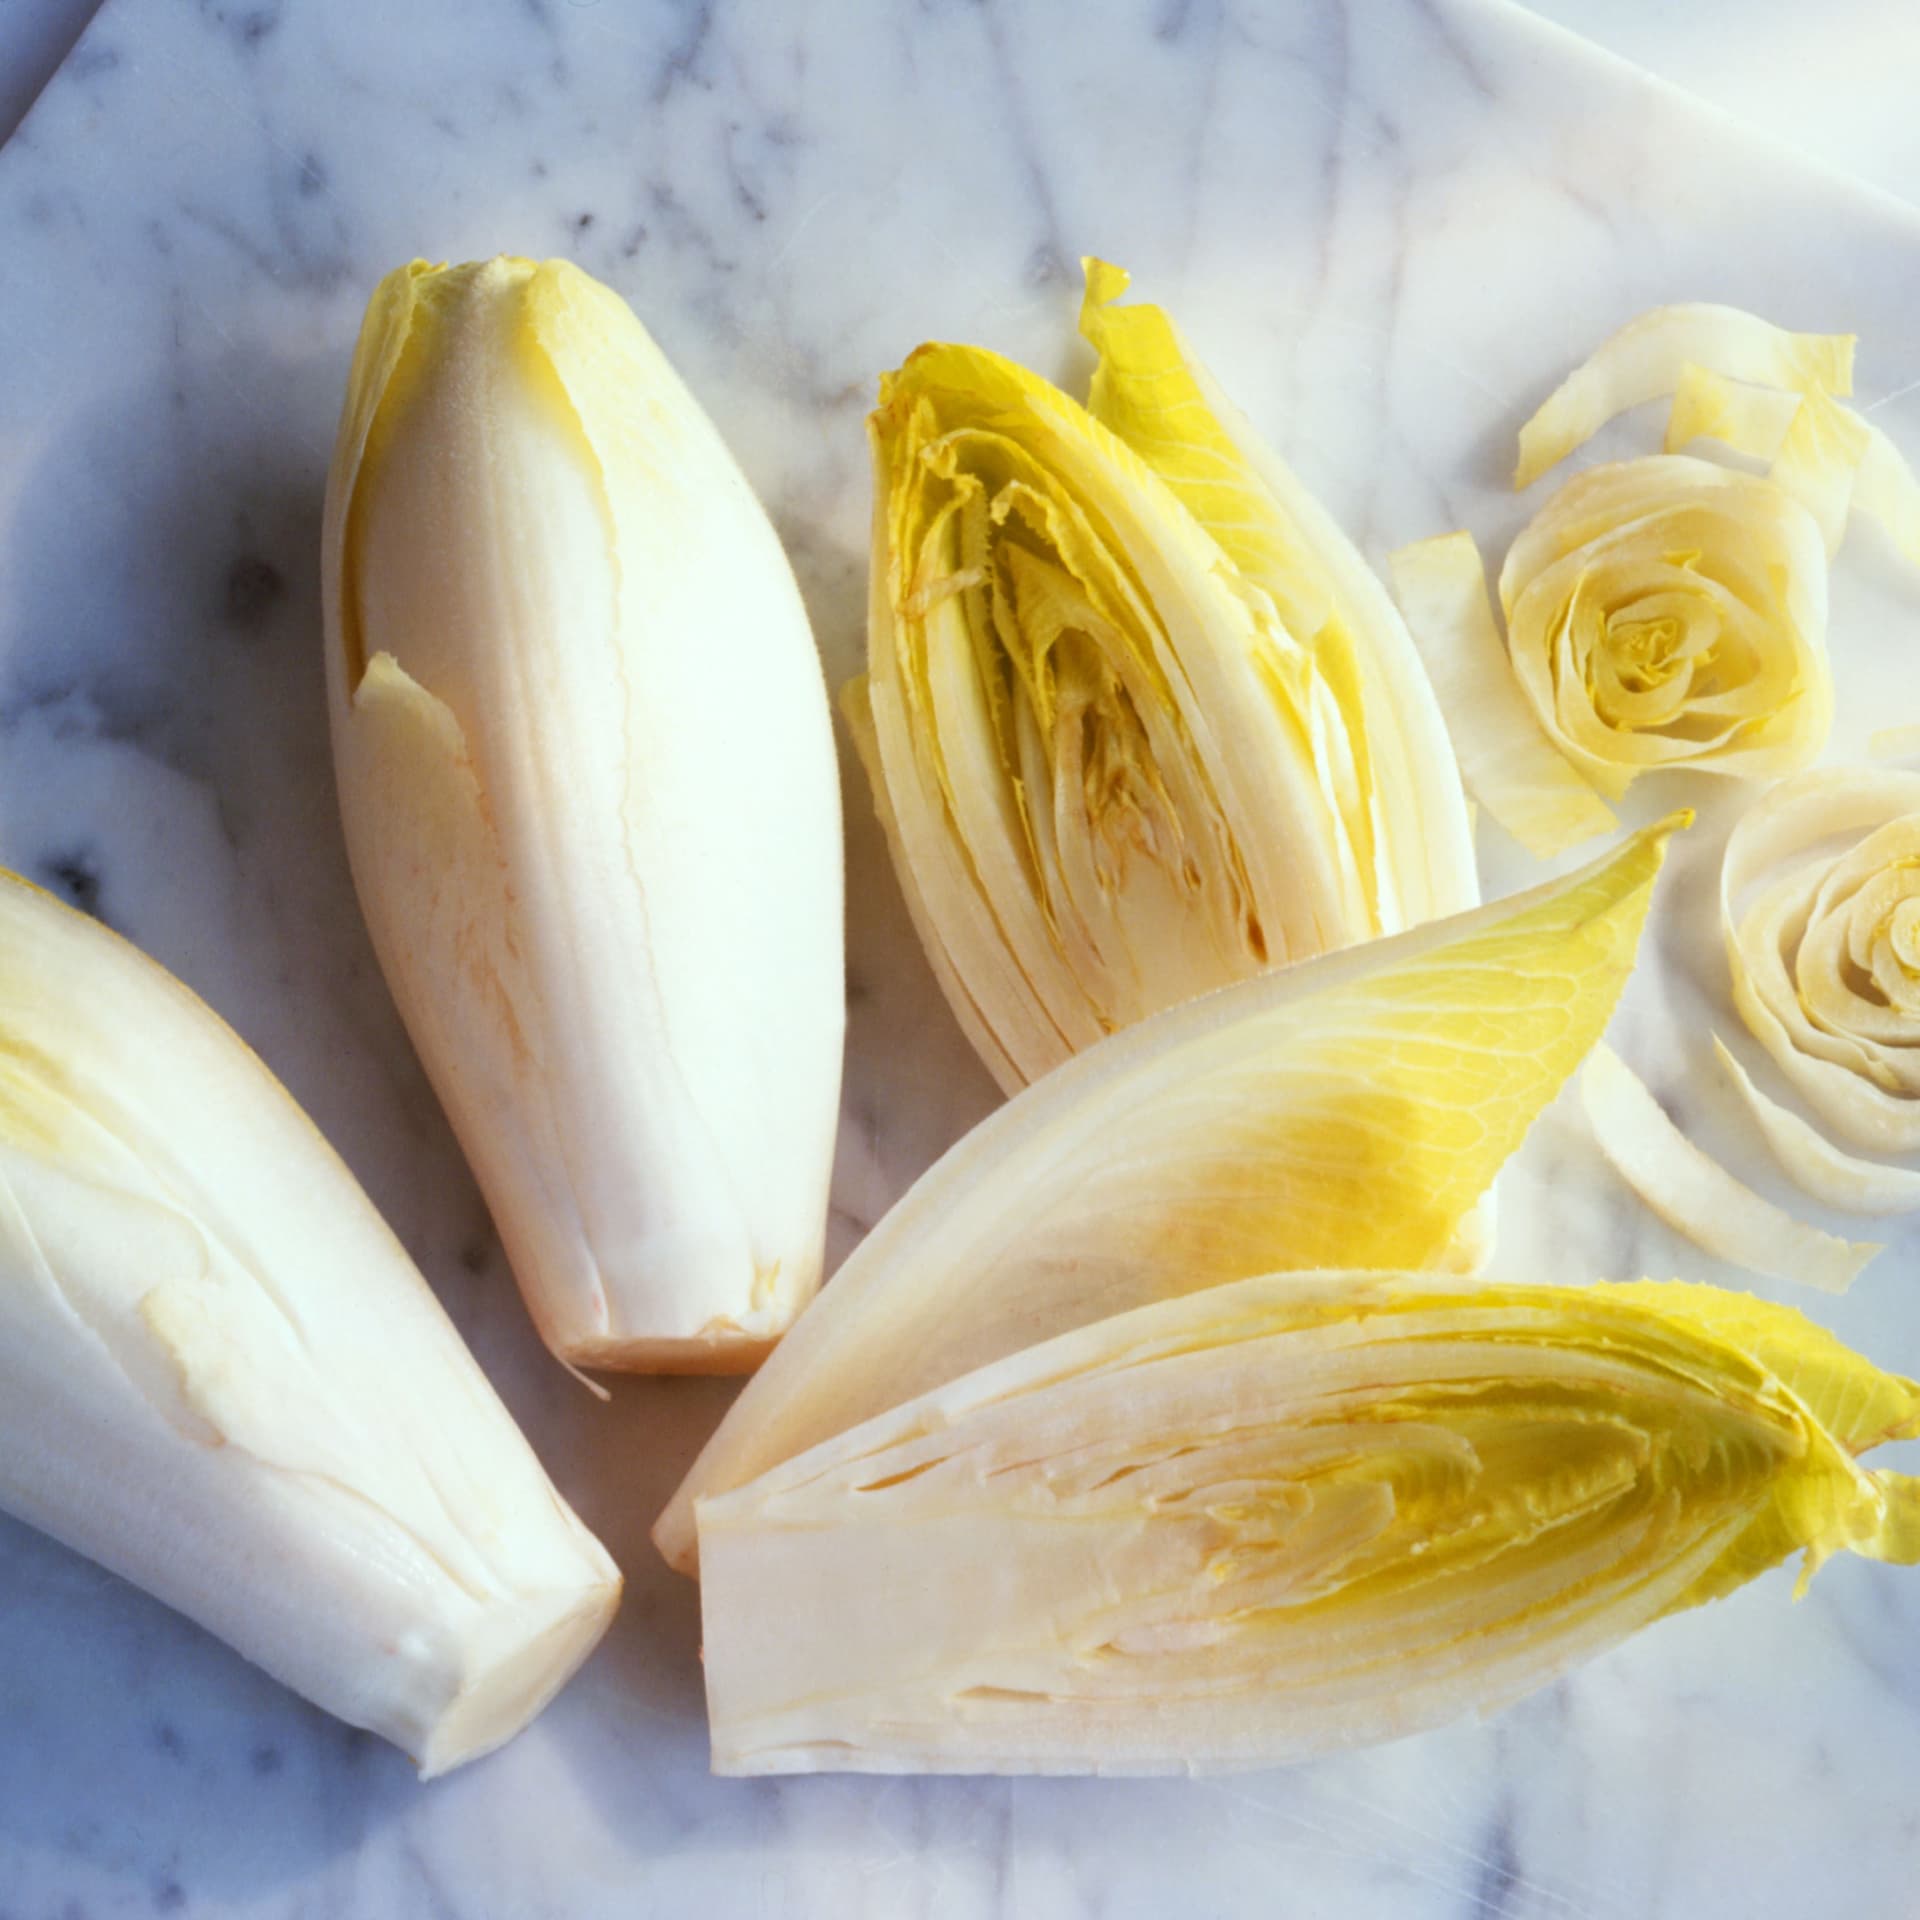 chicory-whole-and-sliced-on-marble-board-126551420-58bdd3d85f9b58af5c3bf47b